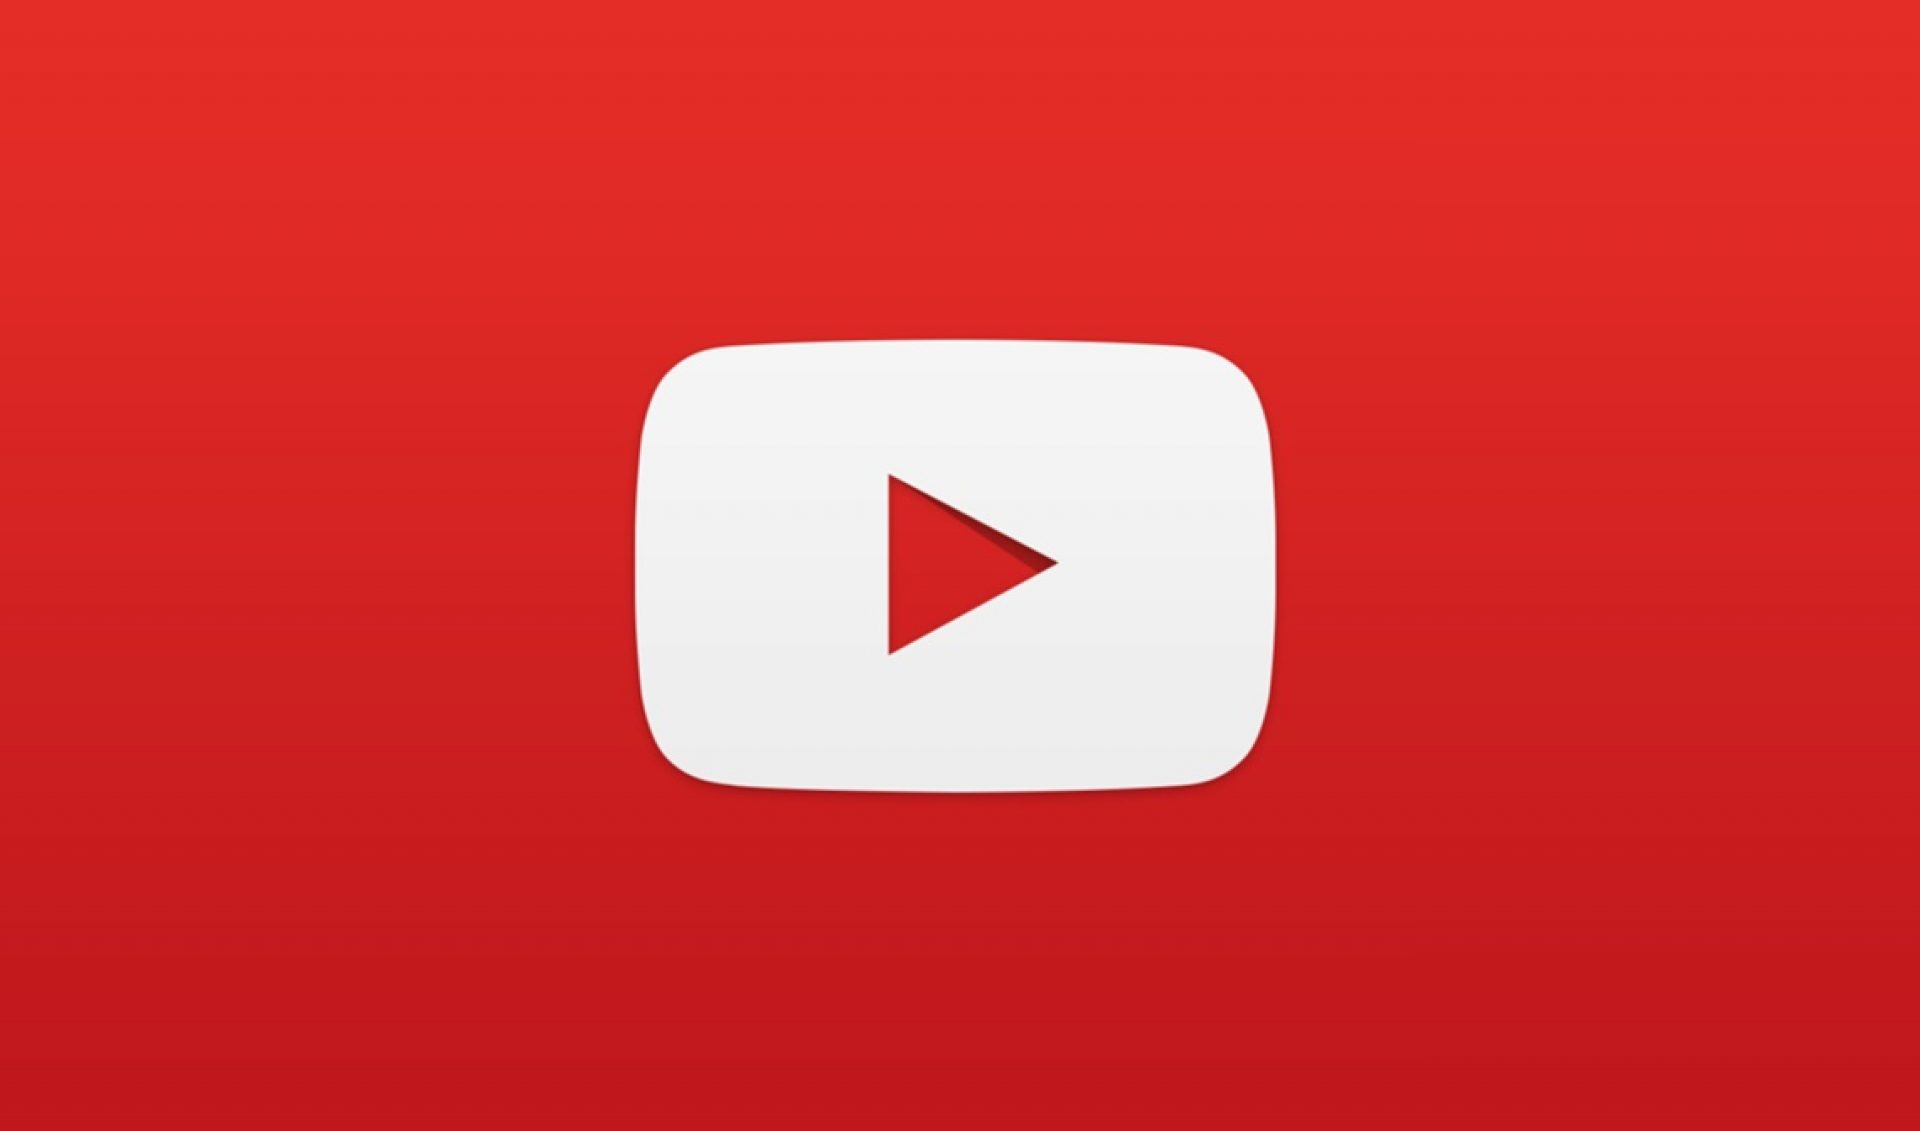 YouTube Adds iMessage Support To Make Sharing Videos Even Easier